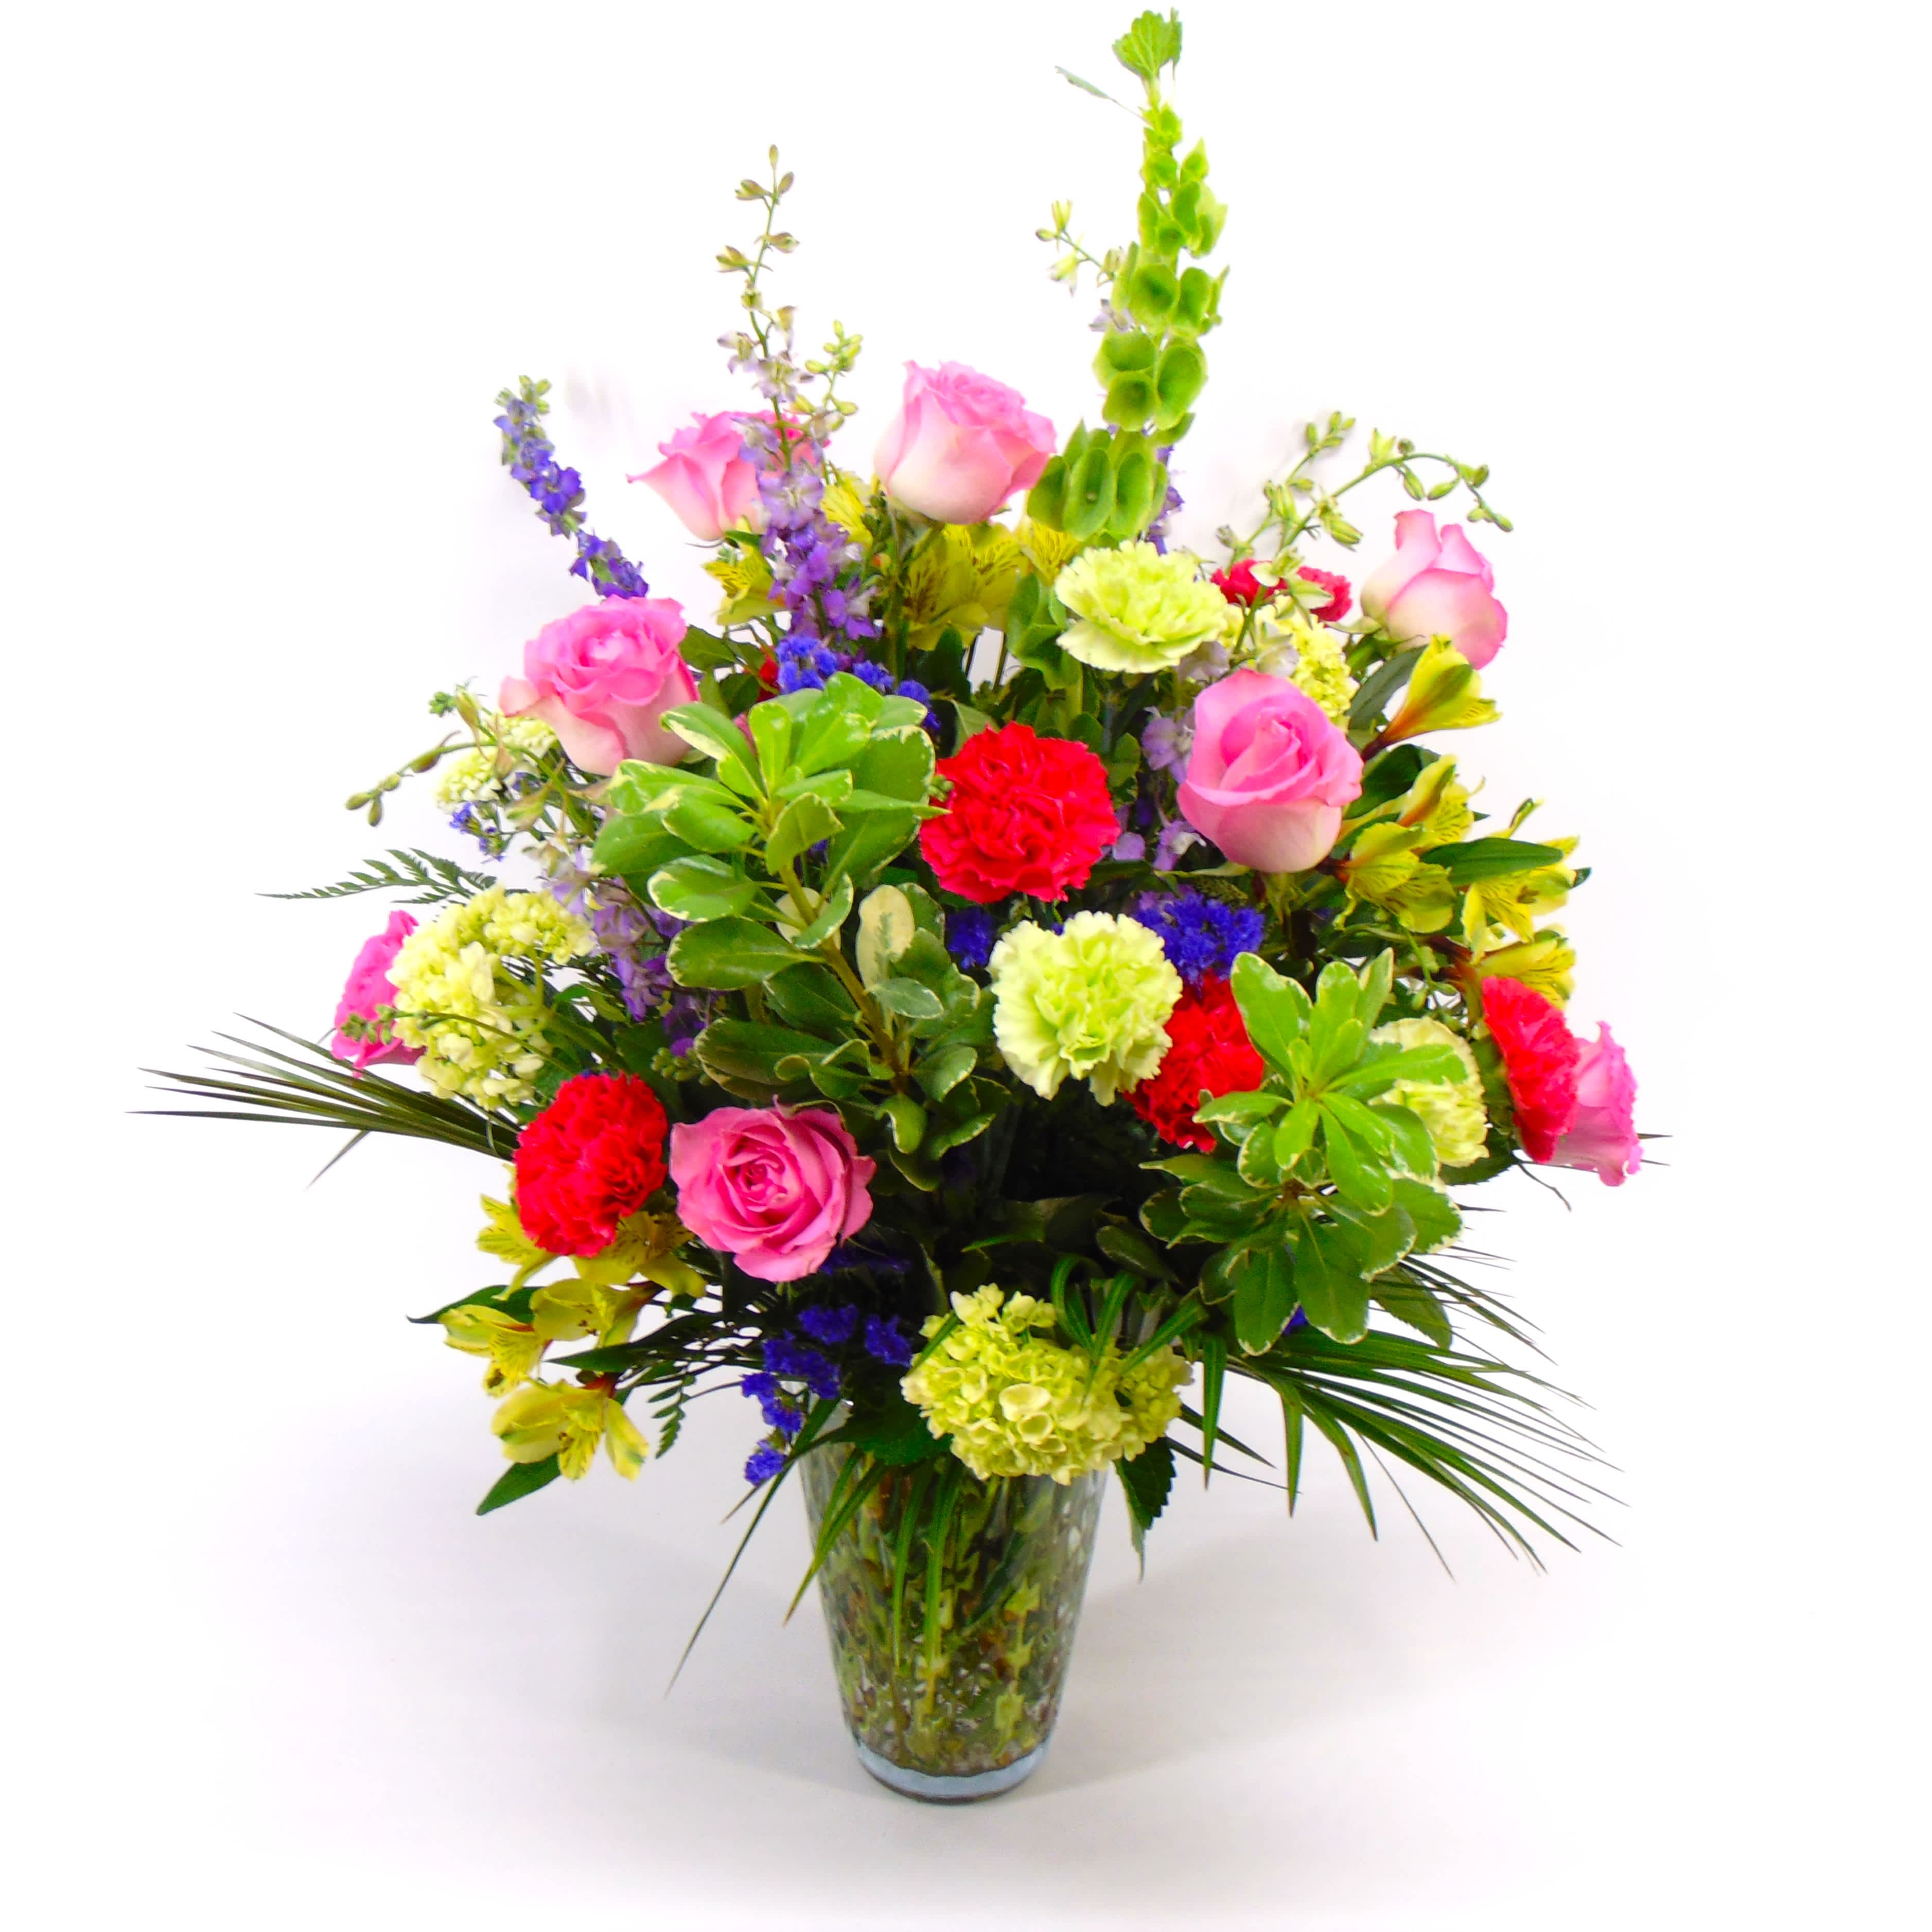 Garden Glory - A grand vase bouquet of vibrant colors and  gloroius blooms designed all-around style in a large glass vase. A garden style mix of roses, larkspur, hydrangea, larkspur, statice and carnations. 